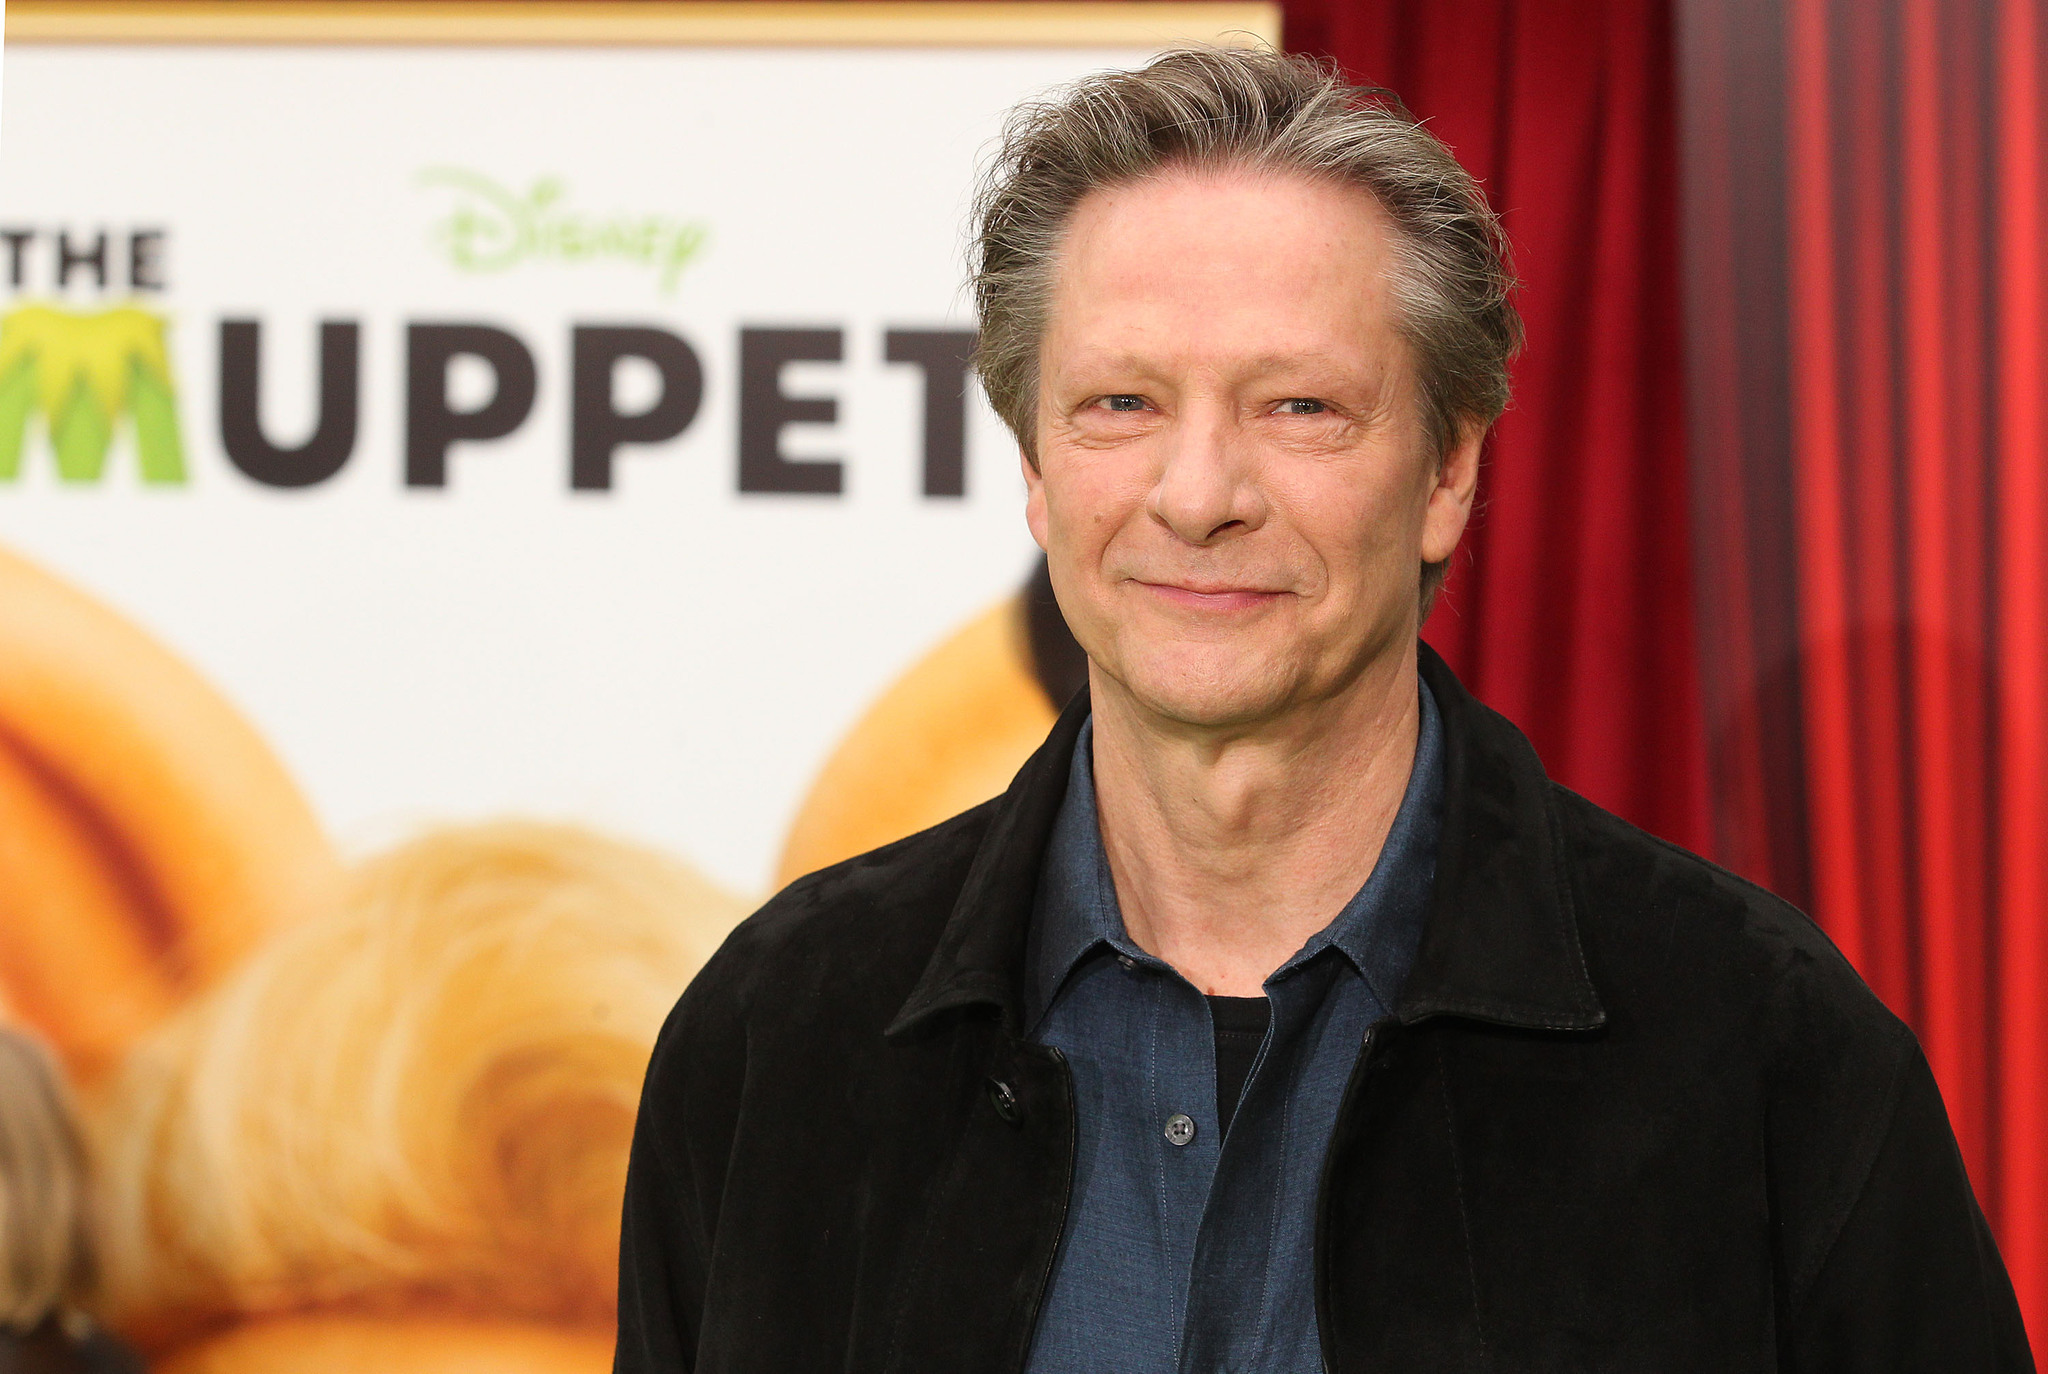 Chris Cooper at event of Mapetai (2011)